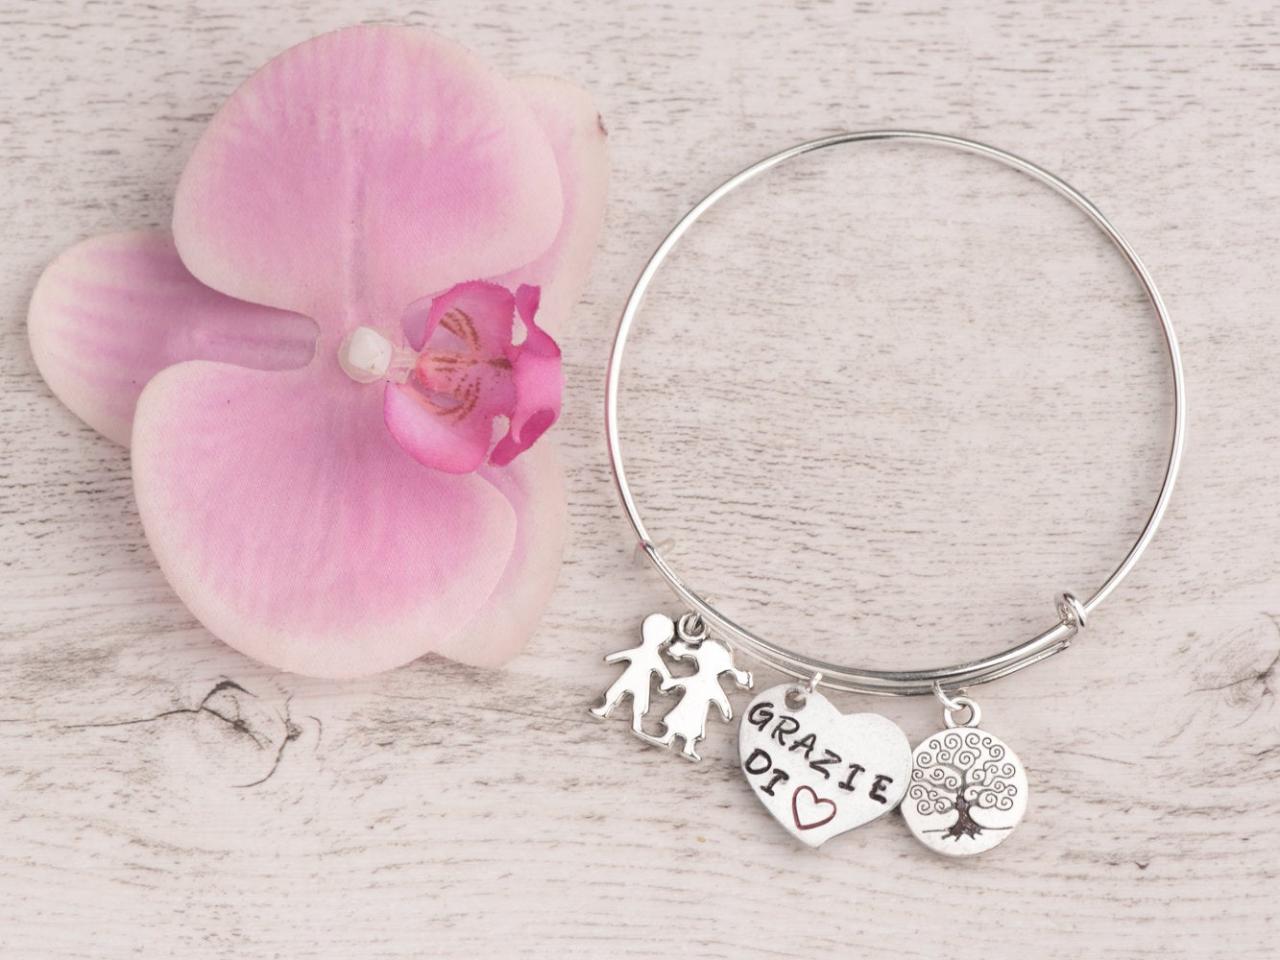 Hand Stamped Mother Bangle Bracelet Gift From 2 Daughters, Handstamped Jewelry, Gift For Mother From Son, The Love Between